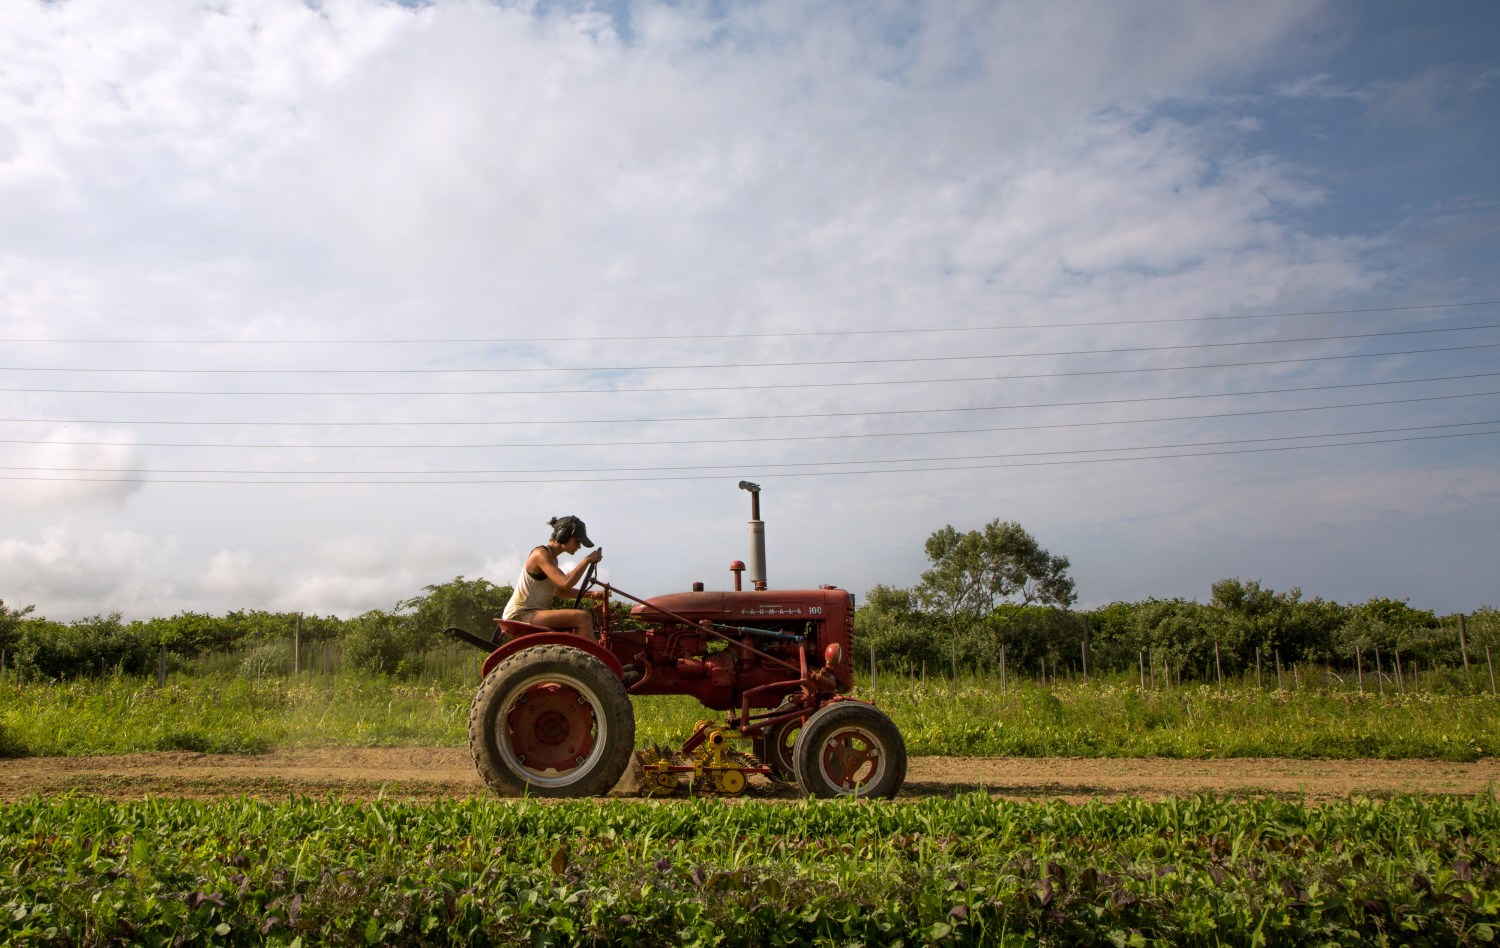 REFILE - CORRECTING ID Farmer Isabel Milligan drives a tractor as she weeds and transplants crops on the farm in Amagansett, New York, U.S., July 11, 2019. Picture taken July 11, 2019.   REUTERS/Lindsay Morris - RC1B9CA1E620